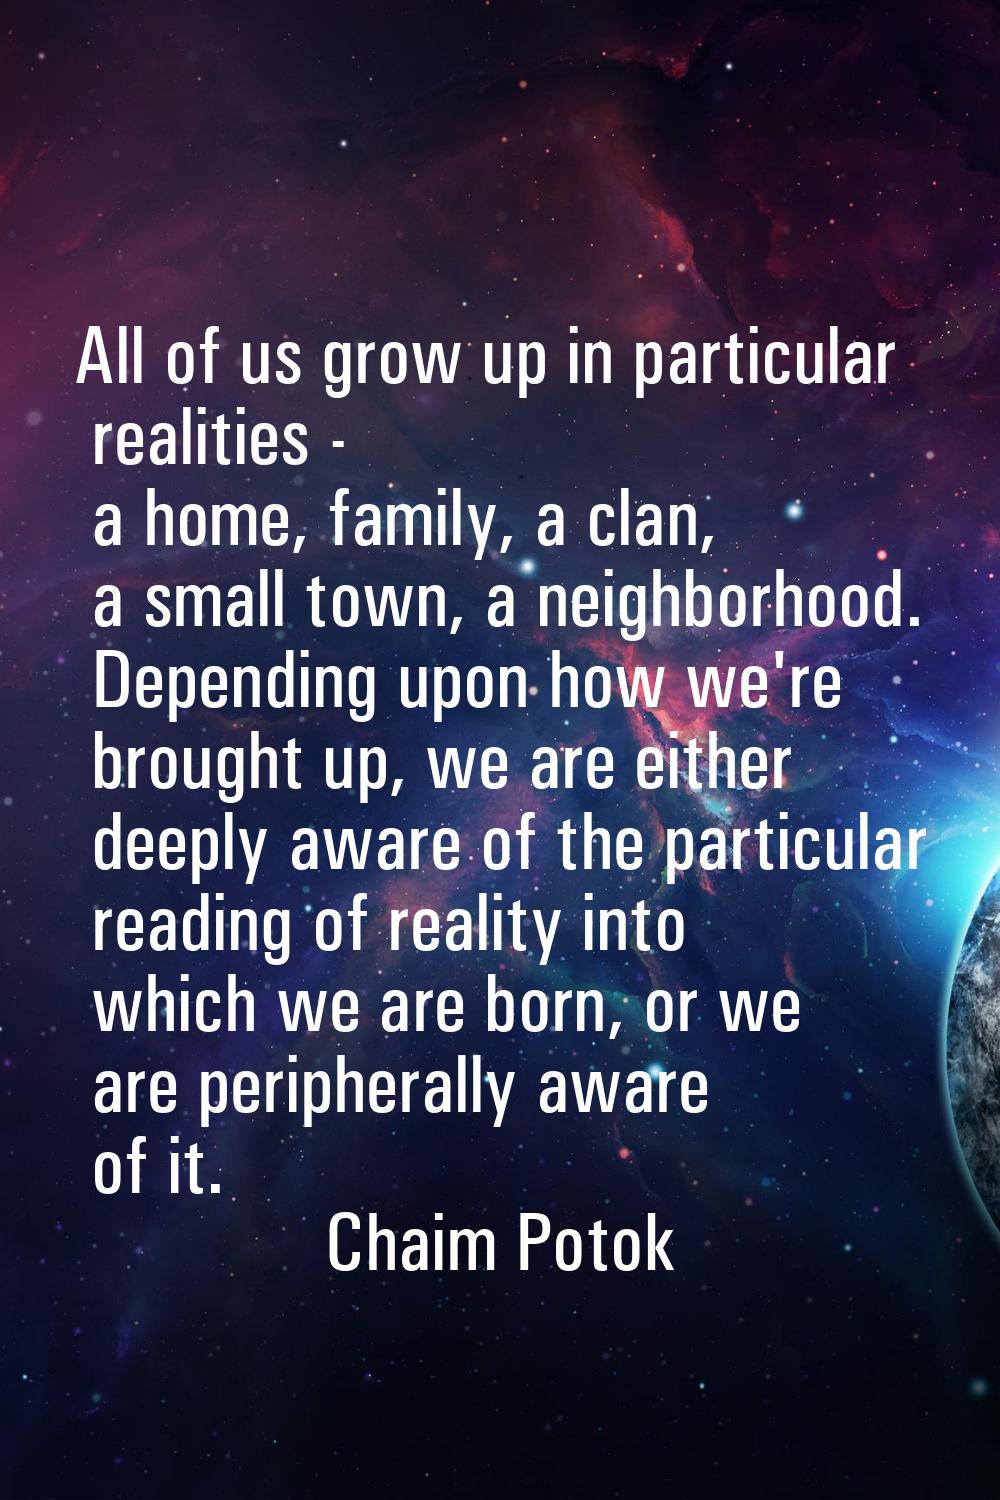 All of us grow up in particular realities - a home, family, a clan, a small town, a neighborhood. D